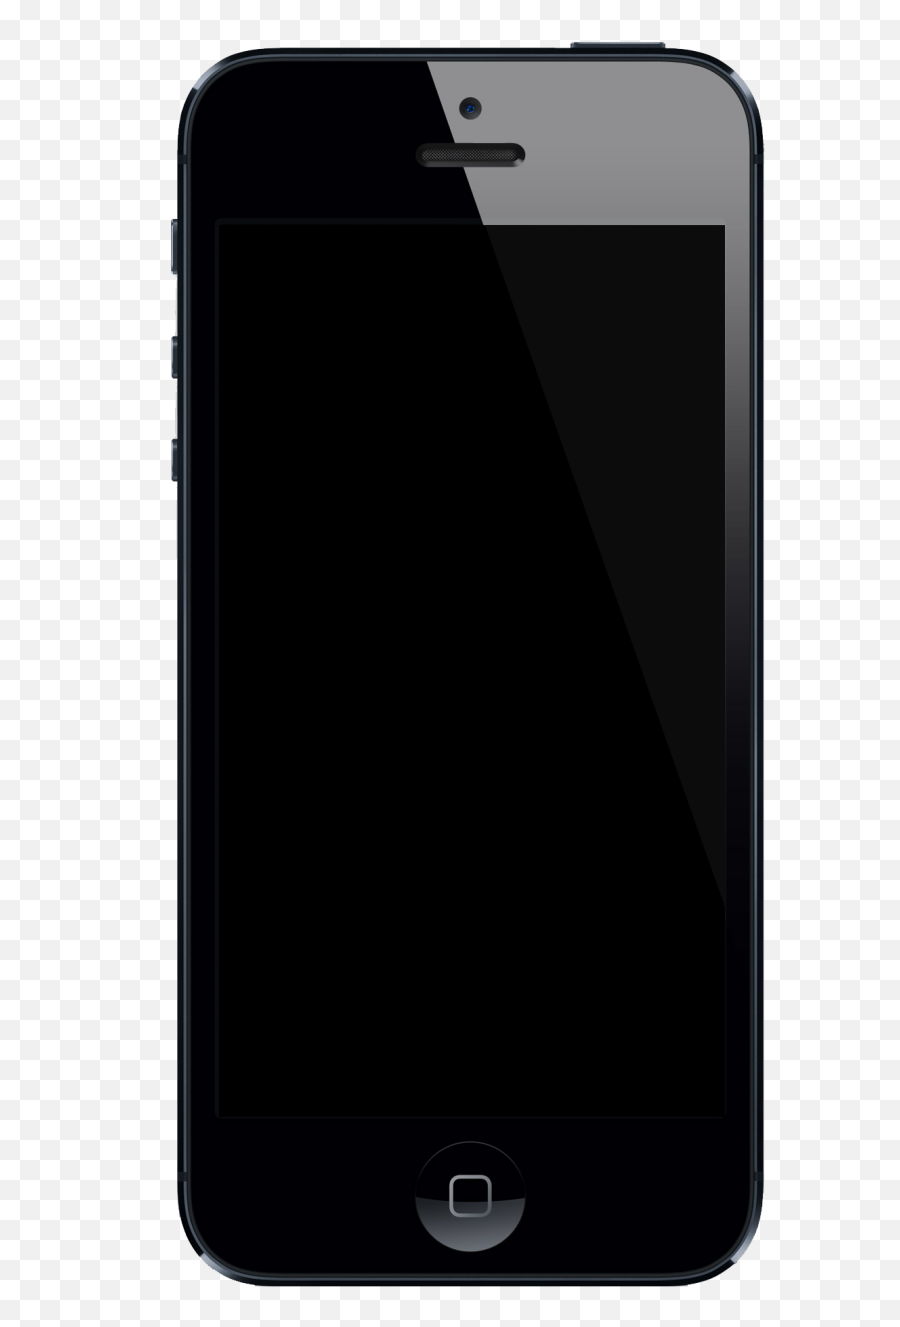 Blank Iphone Screen Transparent Png - Iphone 5 With A Black Screen,Black Screen Png